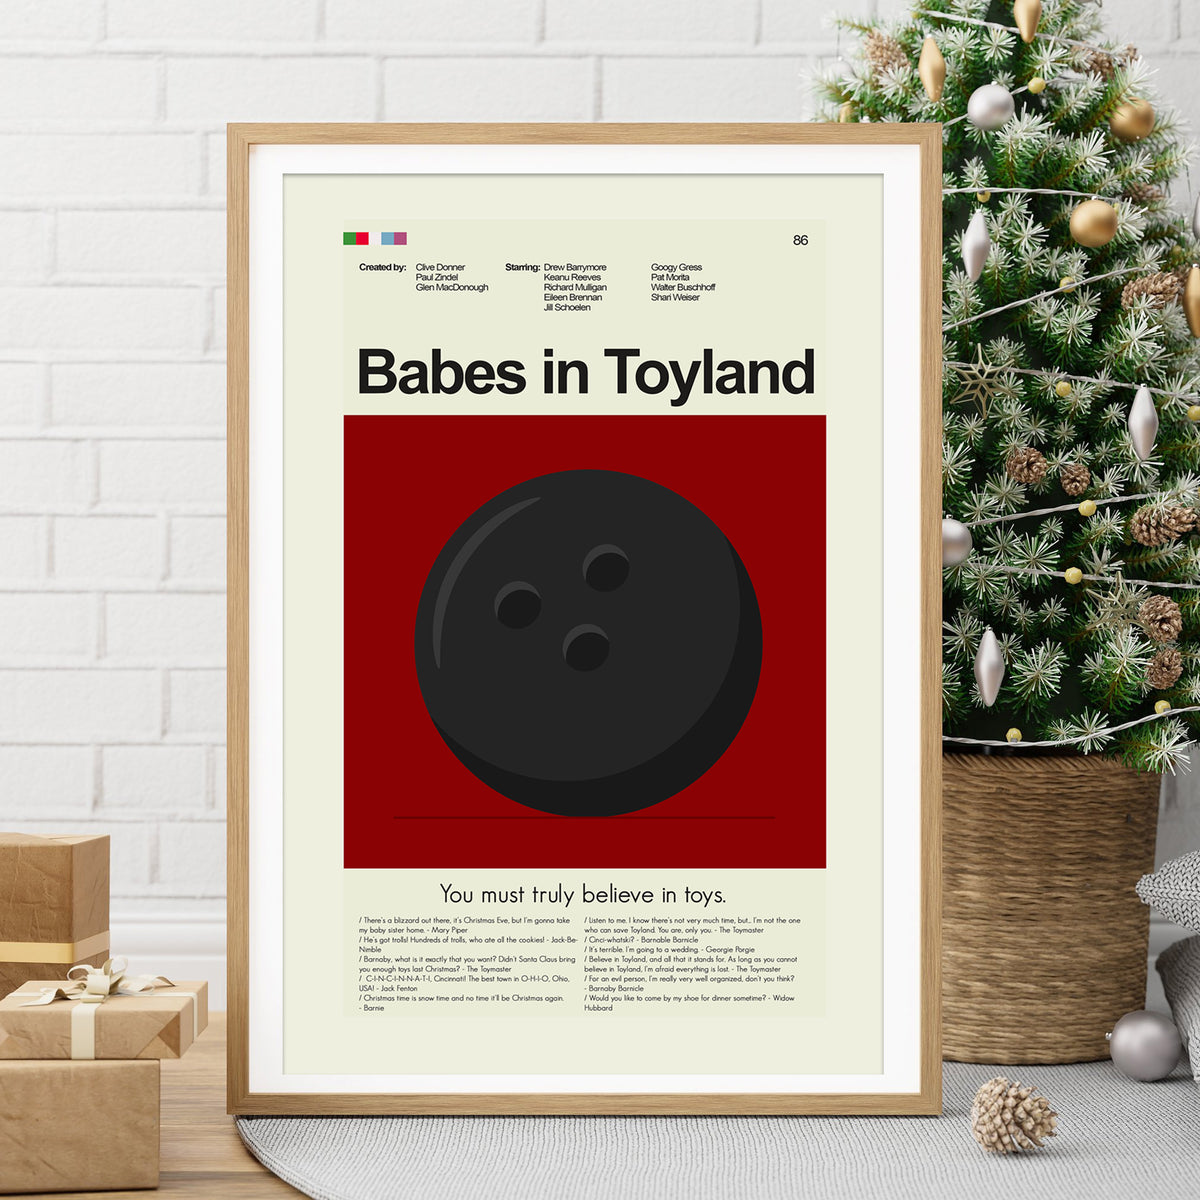 Babes in Toyland (1986) - Bowling Ball | 12"x18" or 18"x24" Print only